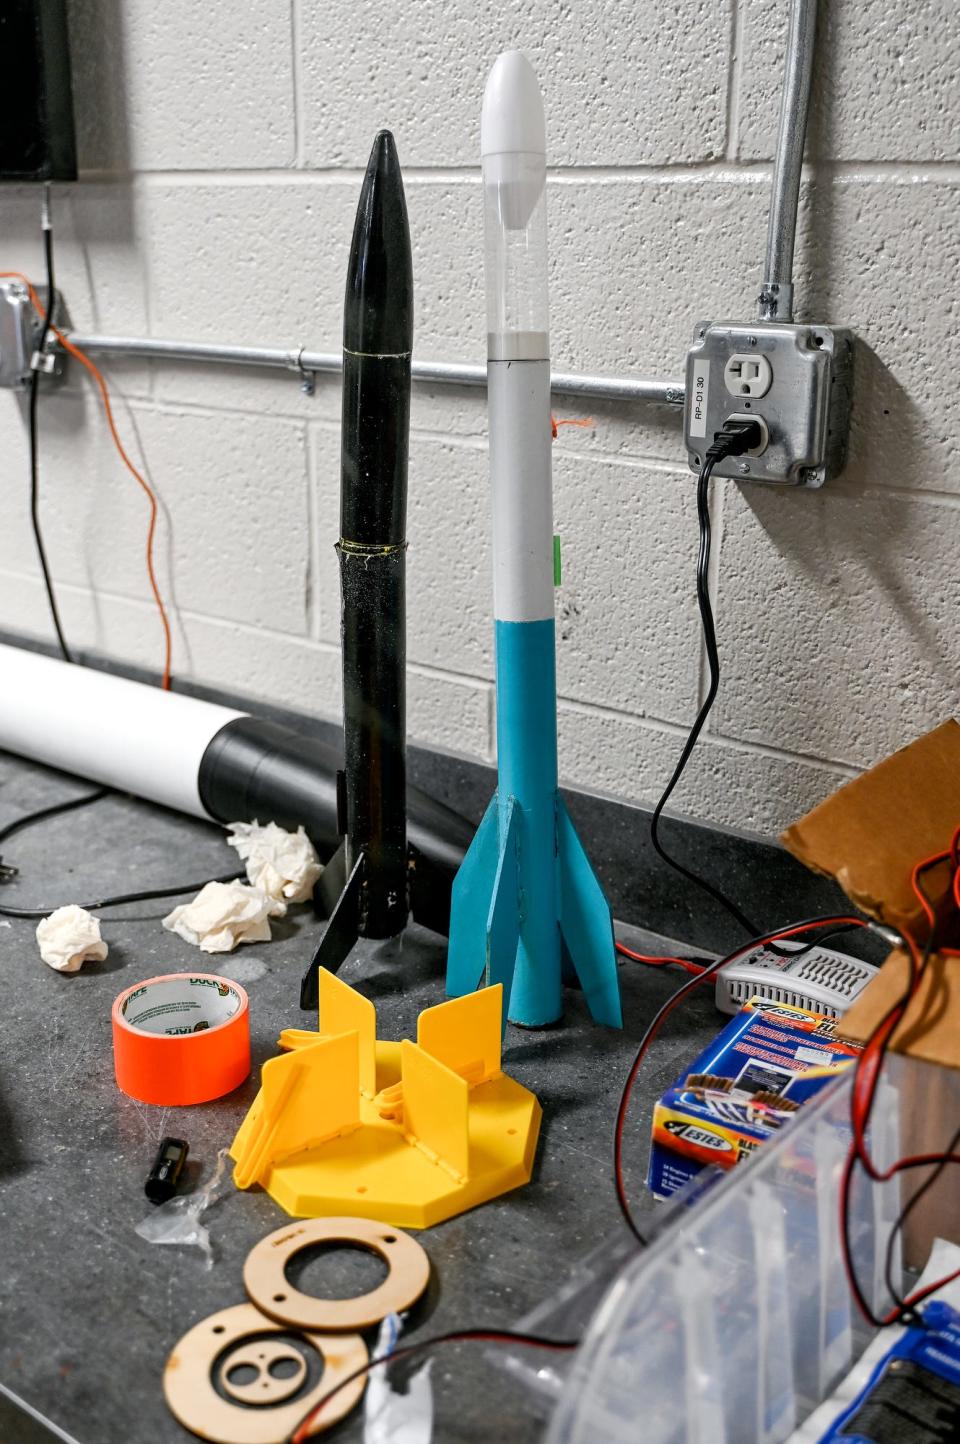 Rockets and other materials used in Bob Richards' robotics class on Tuesday, Feb. 7, 2023, at Stockbridge High School.